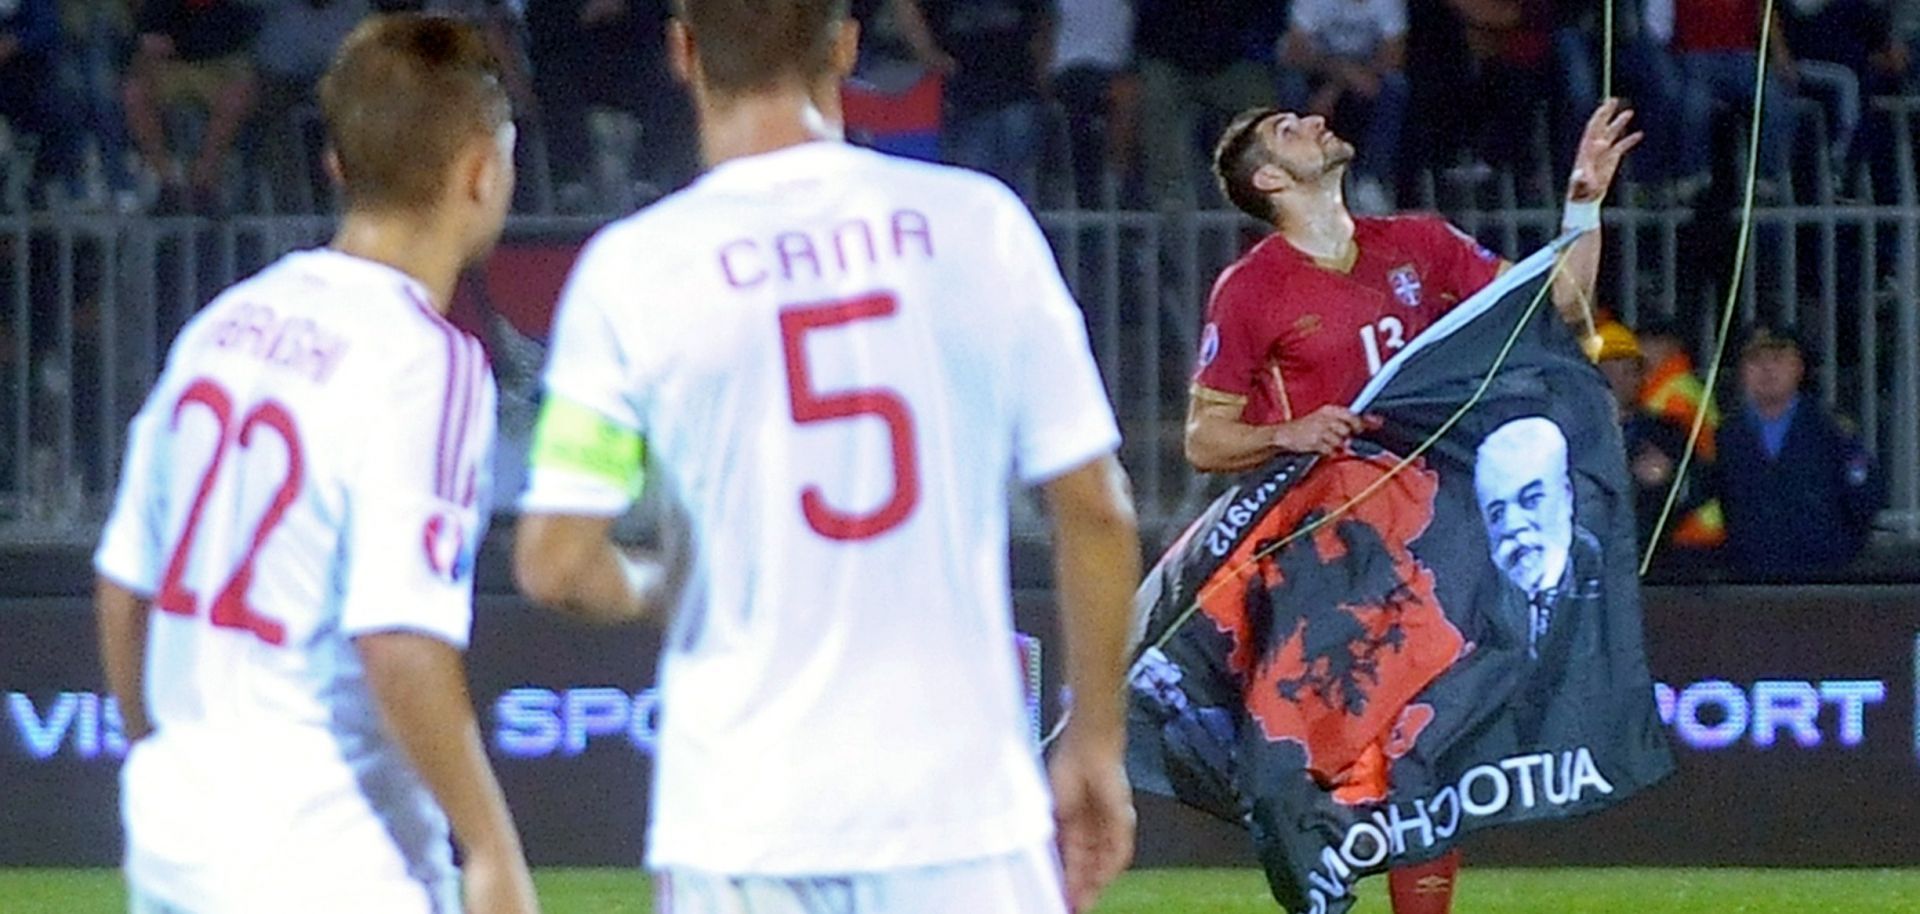 Albania's players look as Serbian soccer player grabs a flag with Albanian national symbols.